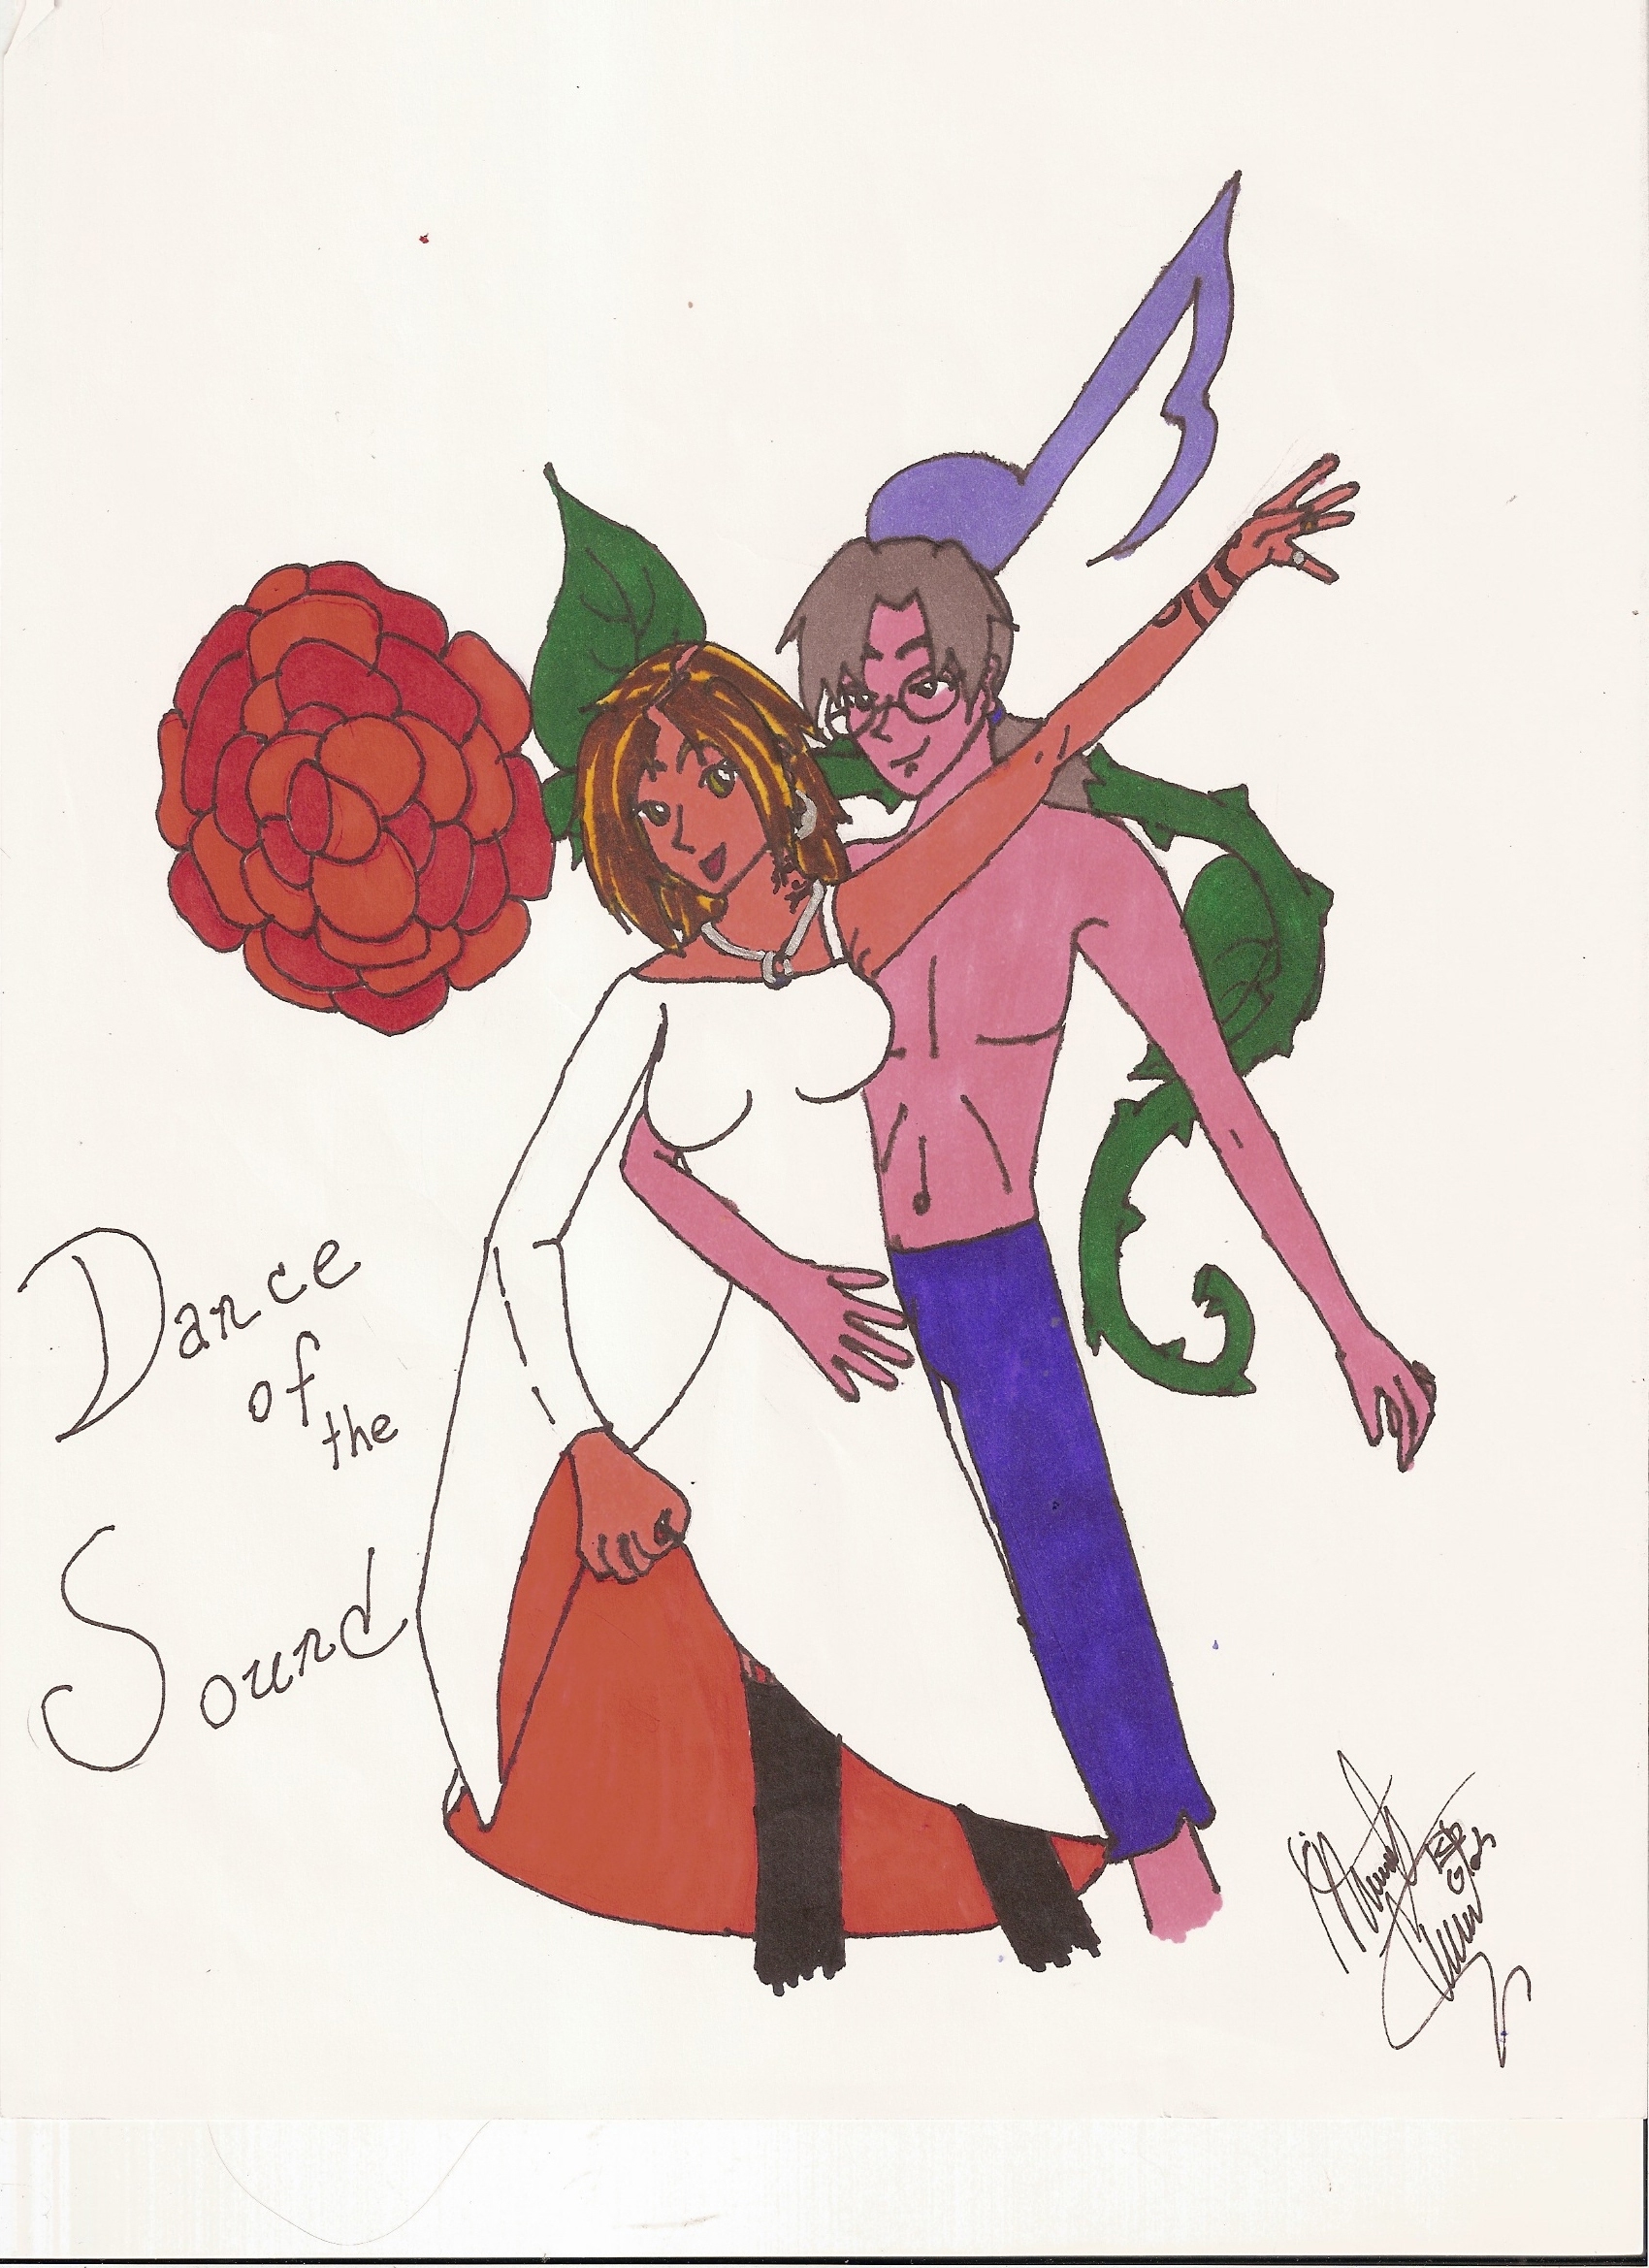 Dance of the Sound by KyosGirl